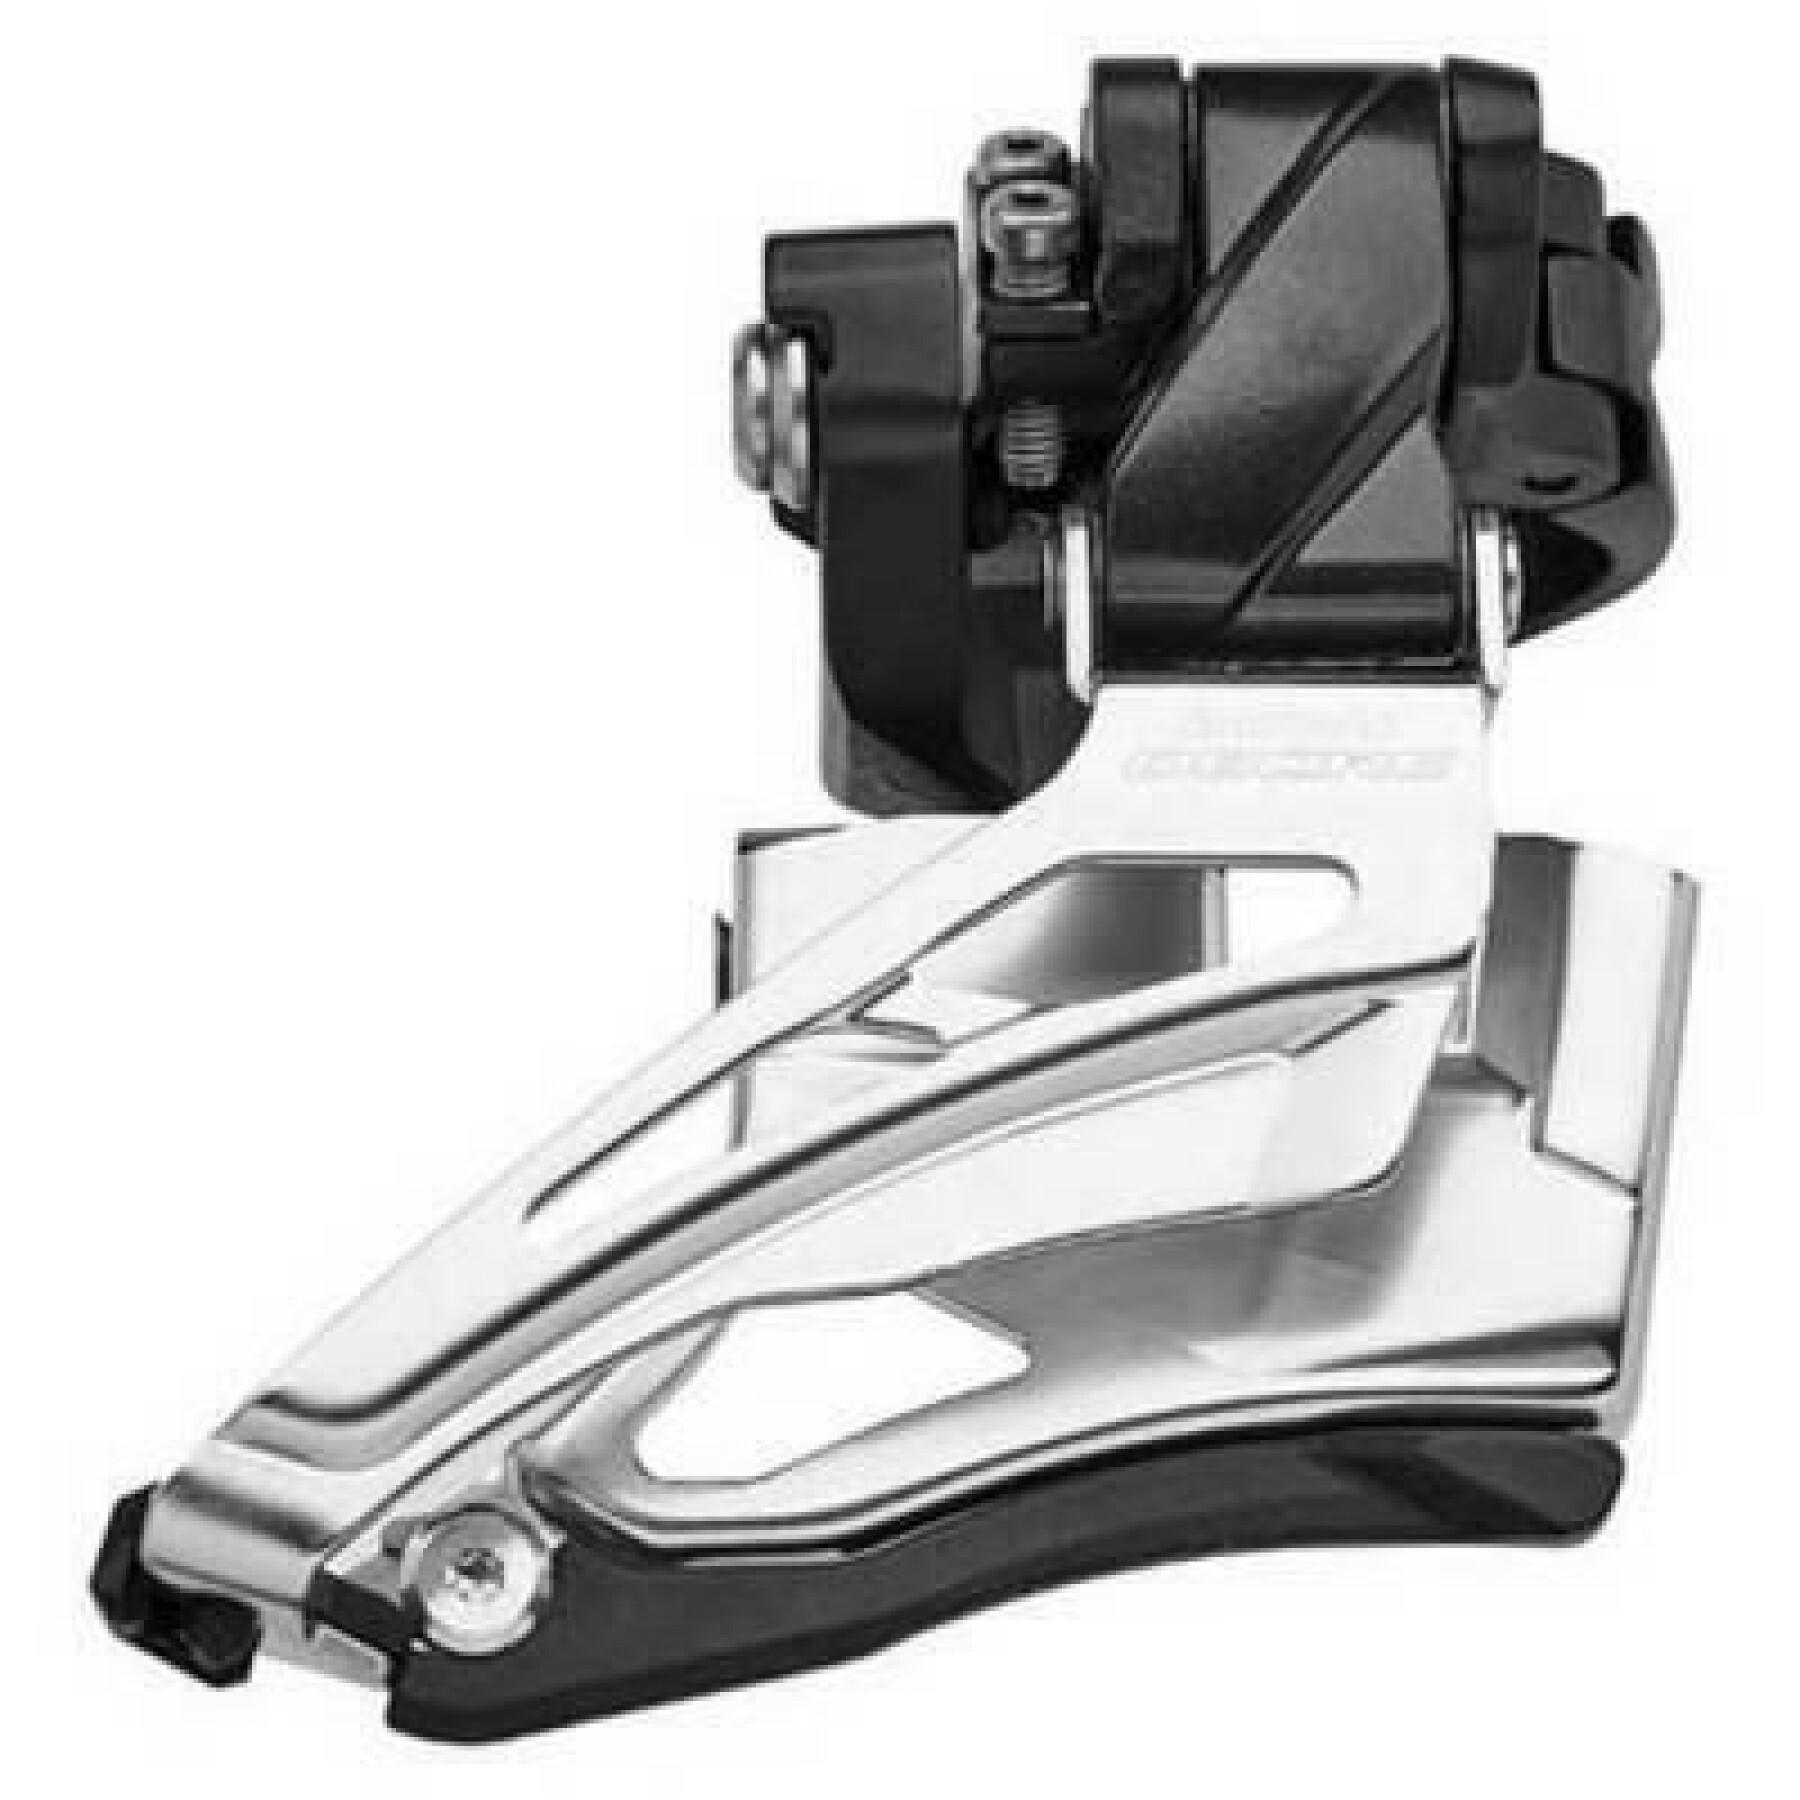 Voorderailleur Shimano deore fd-m6025 down swing dual pull 66-69º collier haut 1x10v